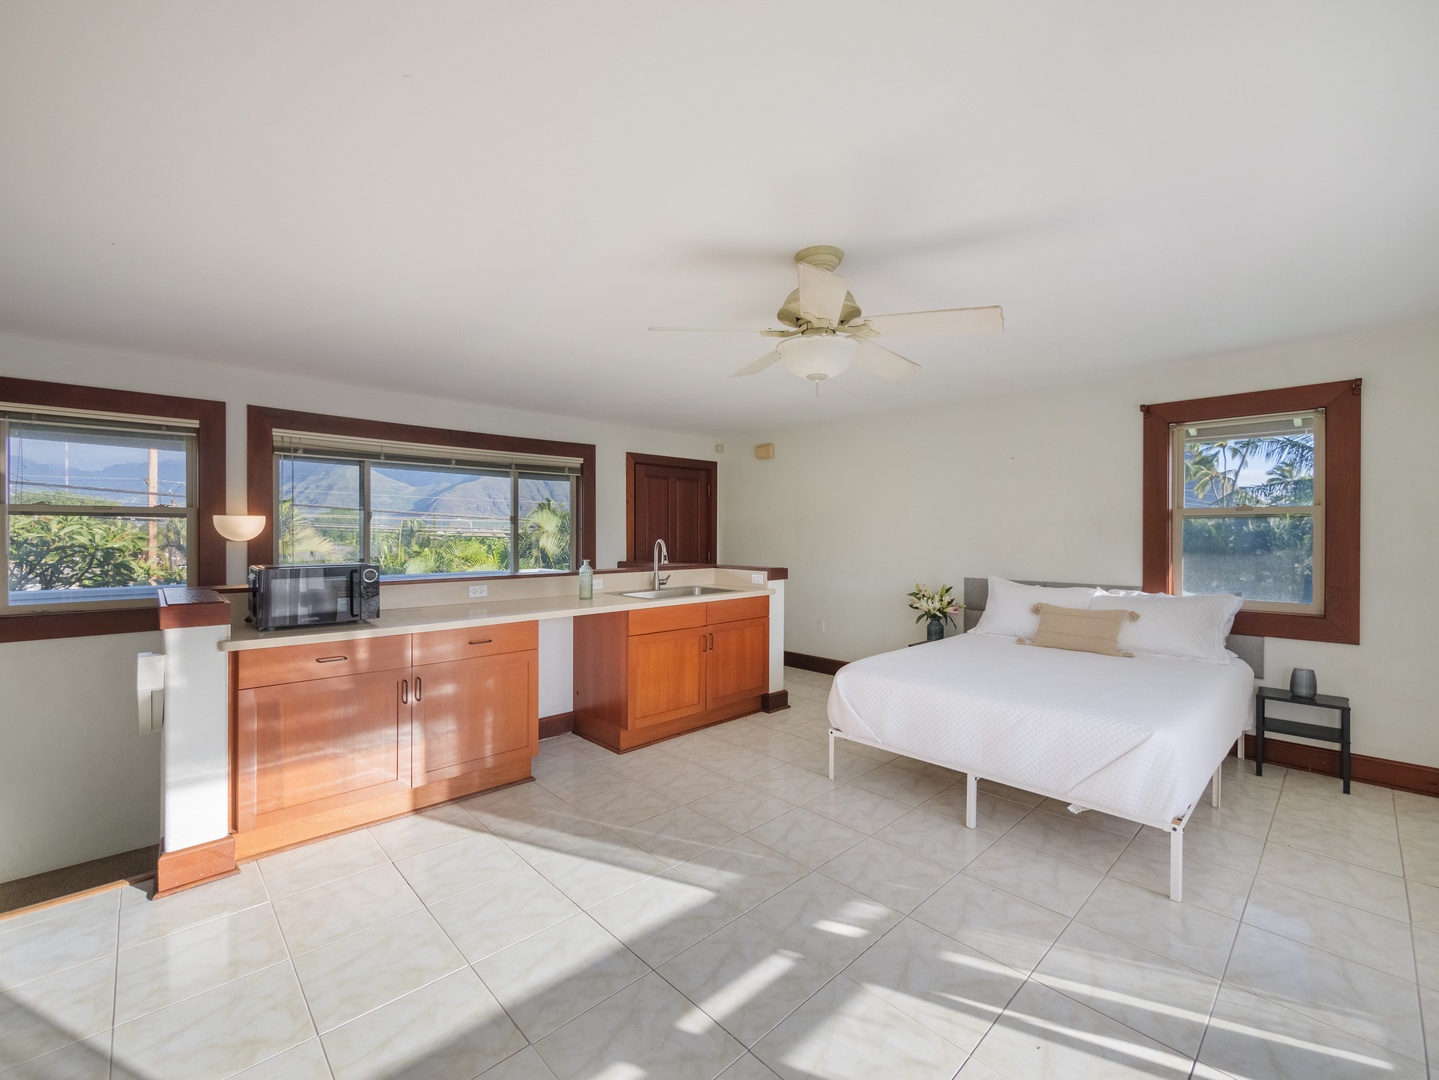 Waianae Vacation Rentals, Konishiki Beachhouse - Guest suite convenience with a kitchinette.